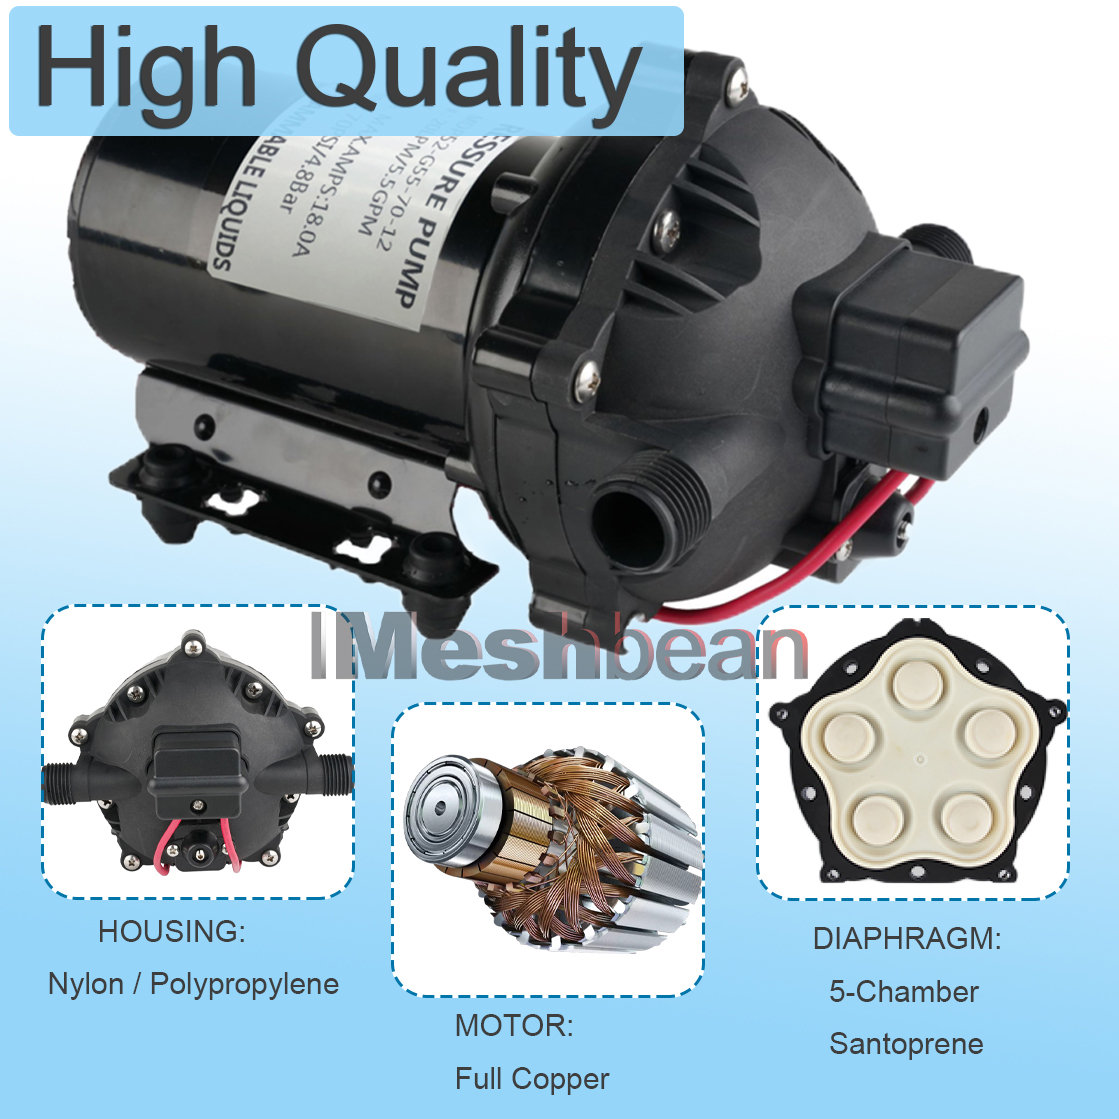 iMeshbean RV Water Pump 5.5 GPM 5.5 Gallons Per Minute 12V Water Pump Automatic 70 PSI Diaphragm Pump with 25 Foot Coiled Hose Washdown Pumps for Boats Caravan Rv Marine Yacht - image 3 of 7